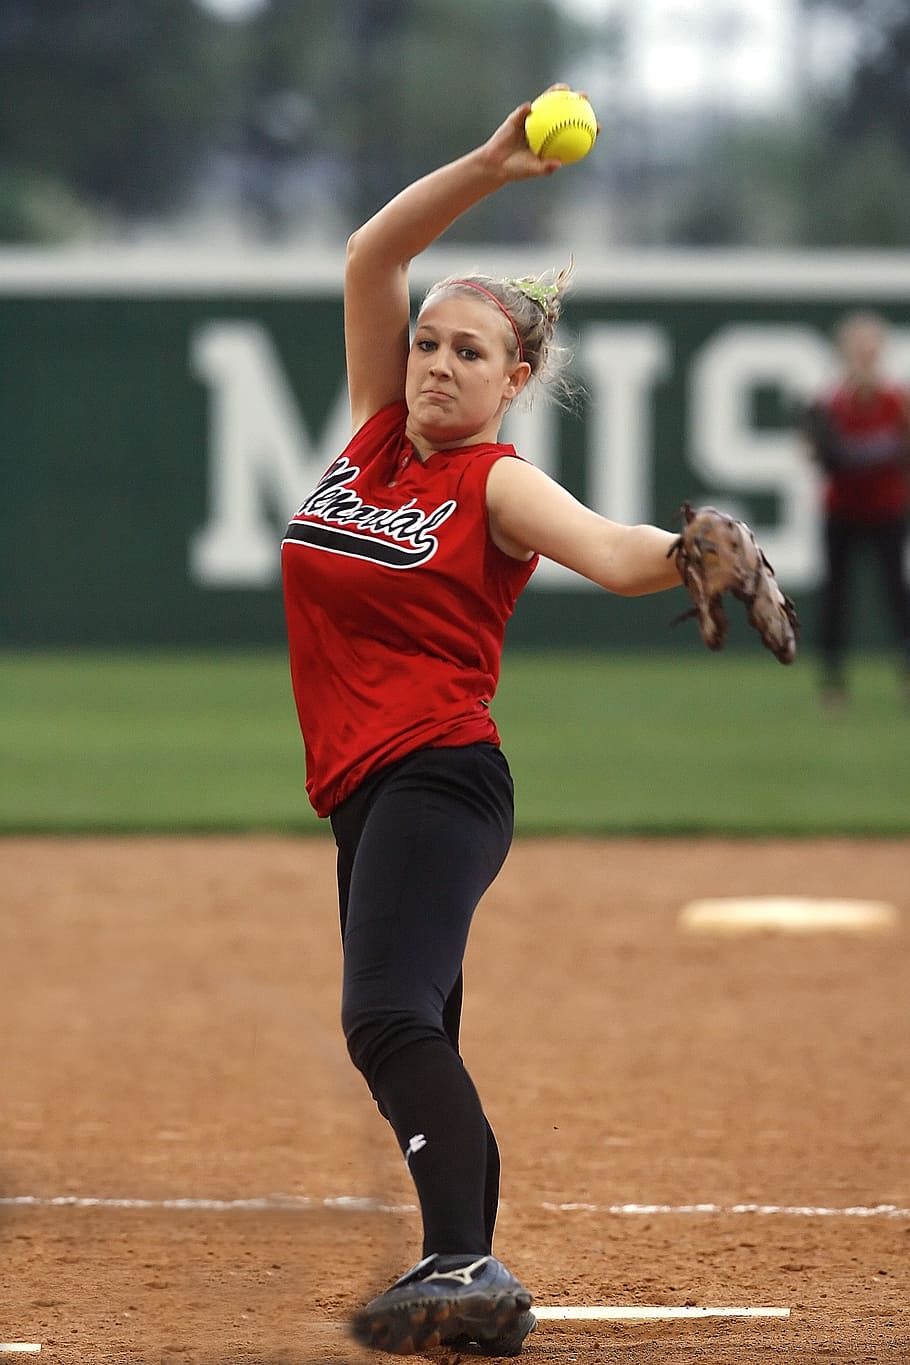 Softball, Pitcher, Female, Action, pitching, pitcher's mound